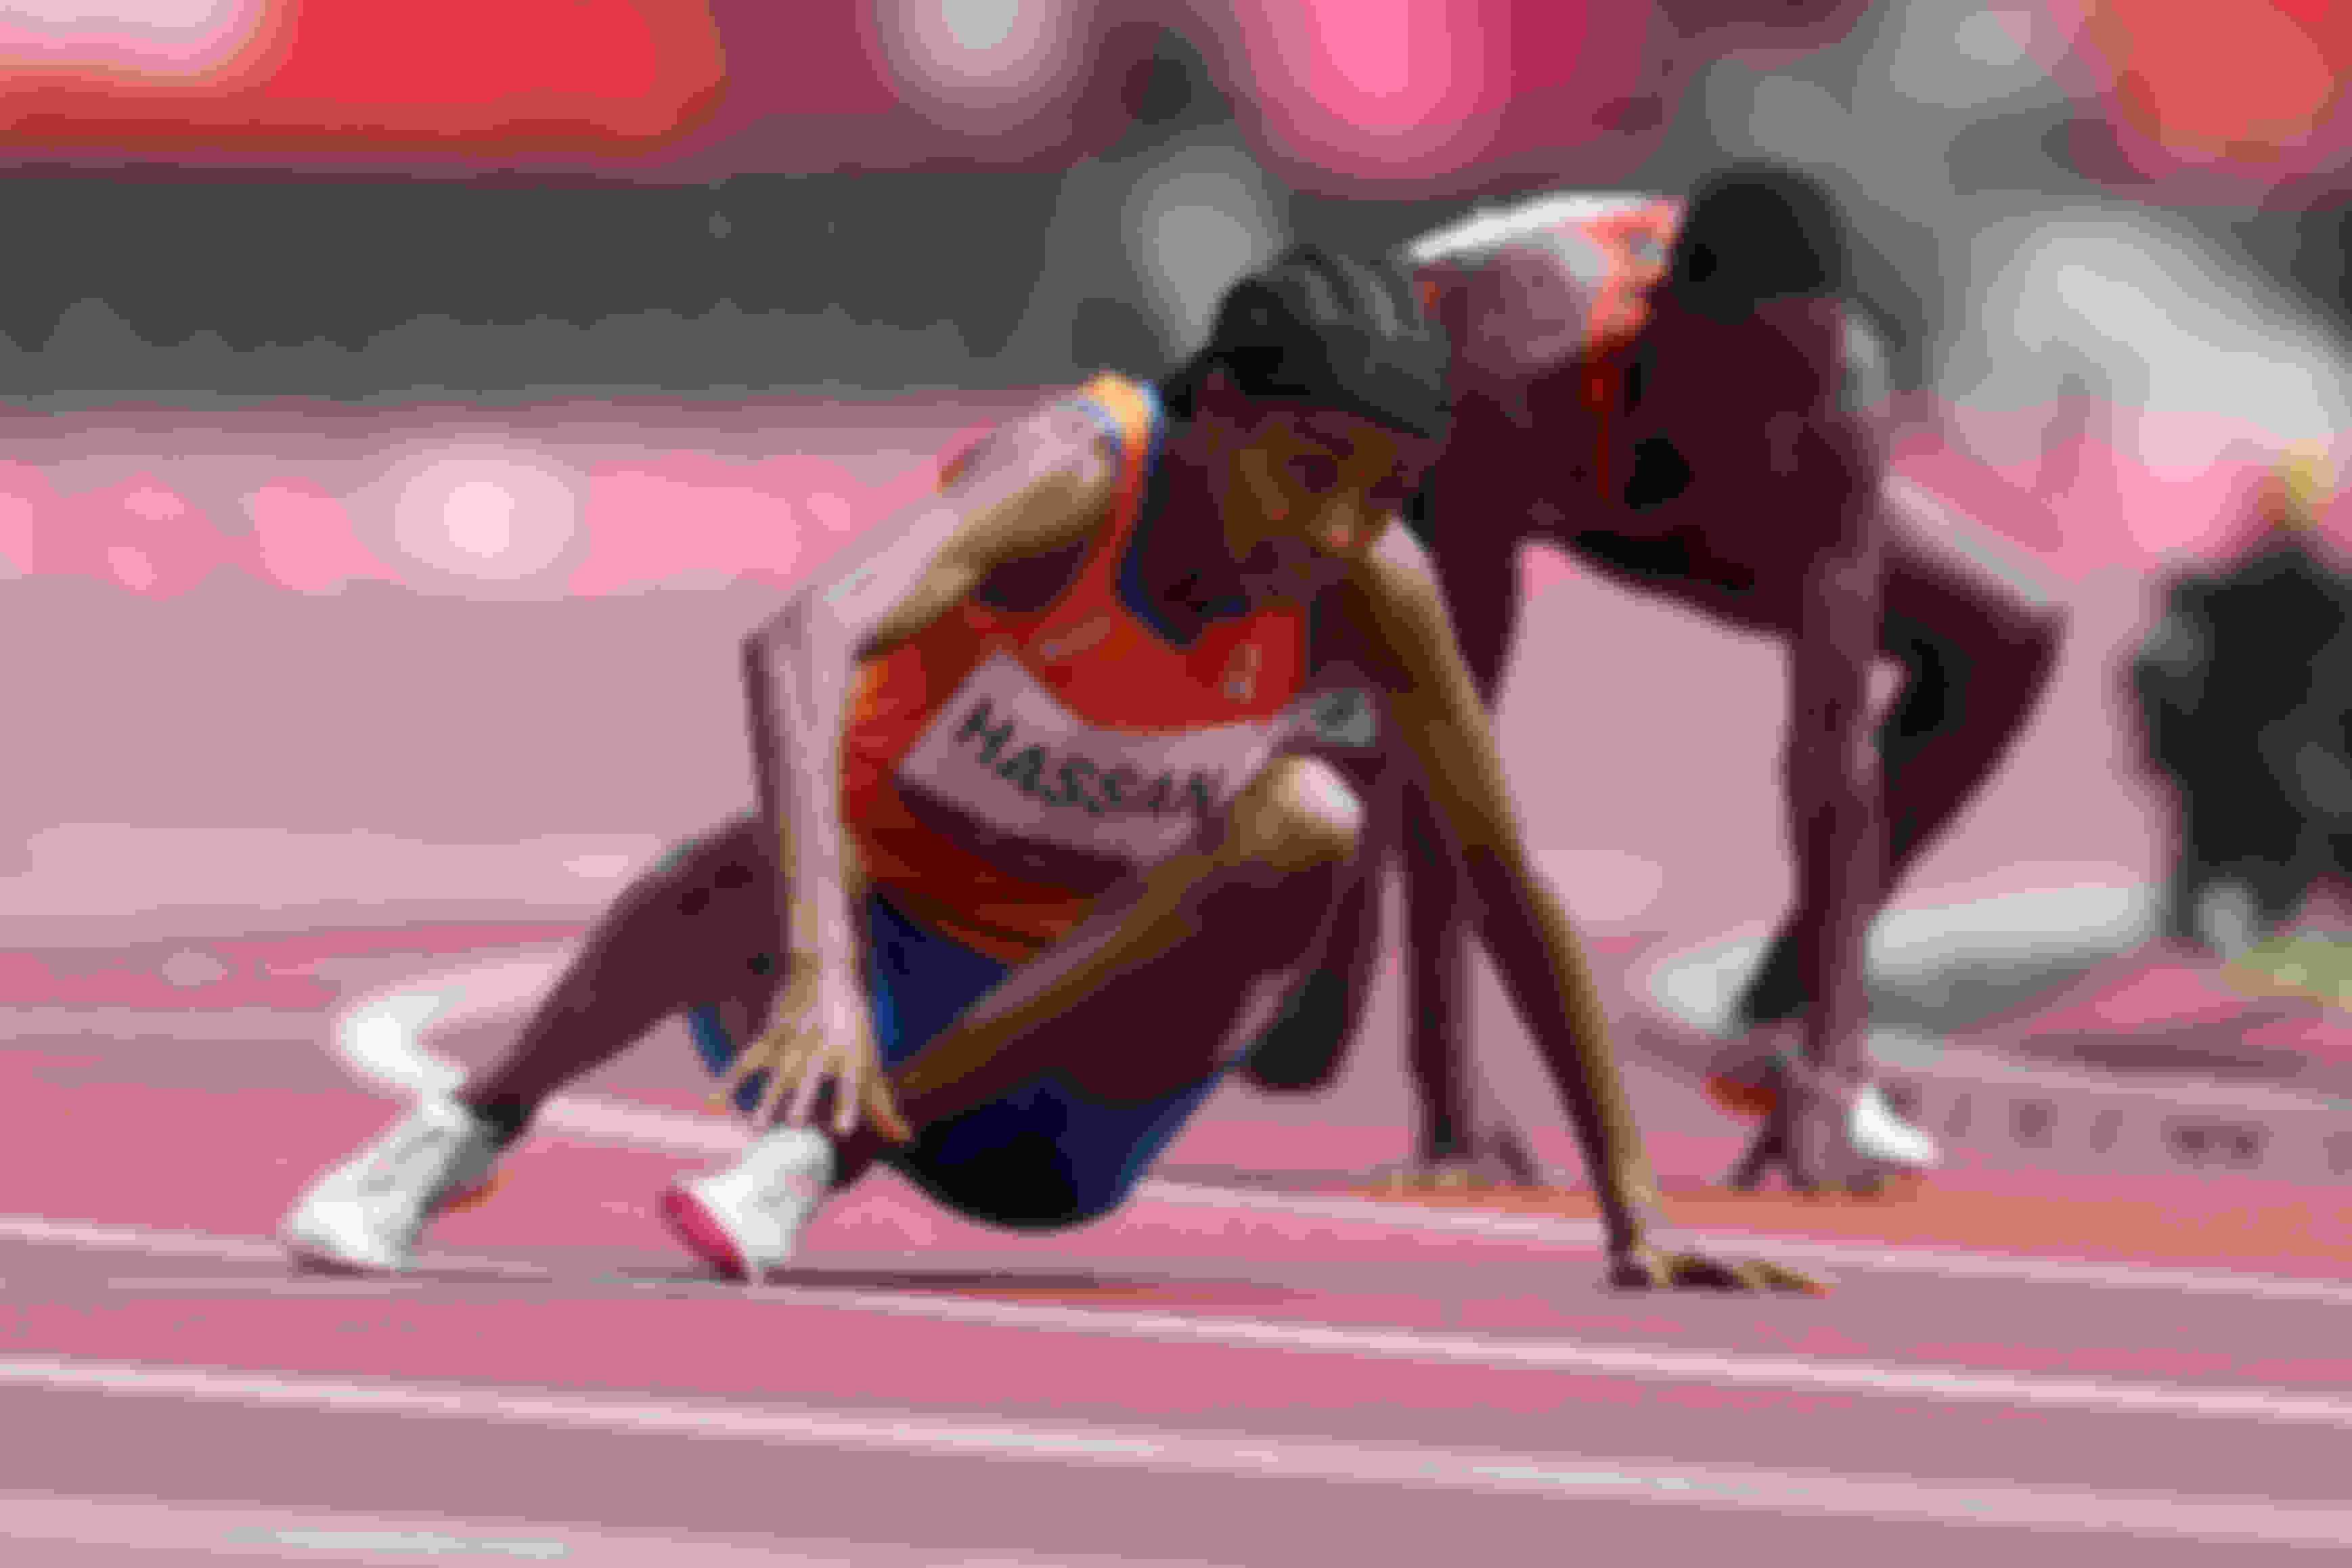 Hassan fall 1500m